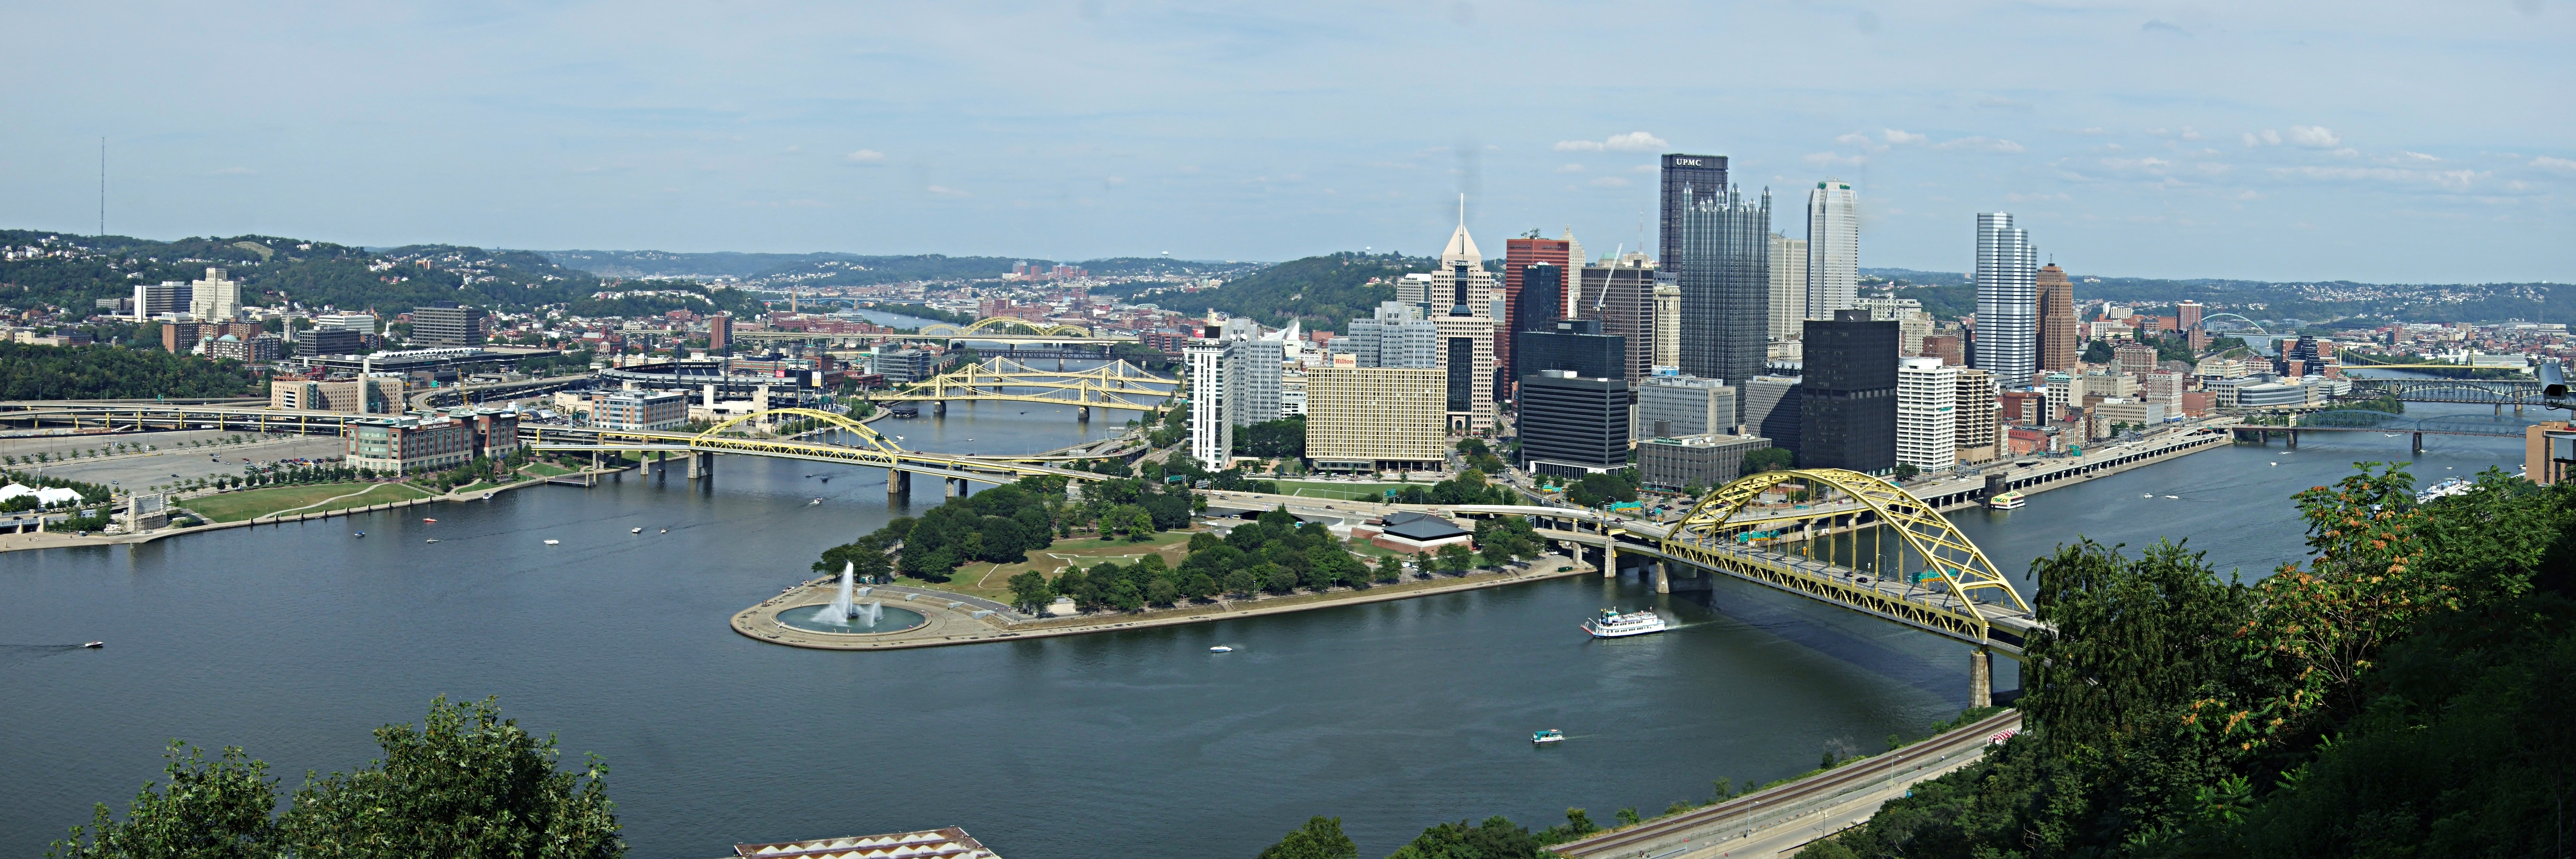 Images of Pittsburgh | 7500x2500